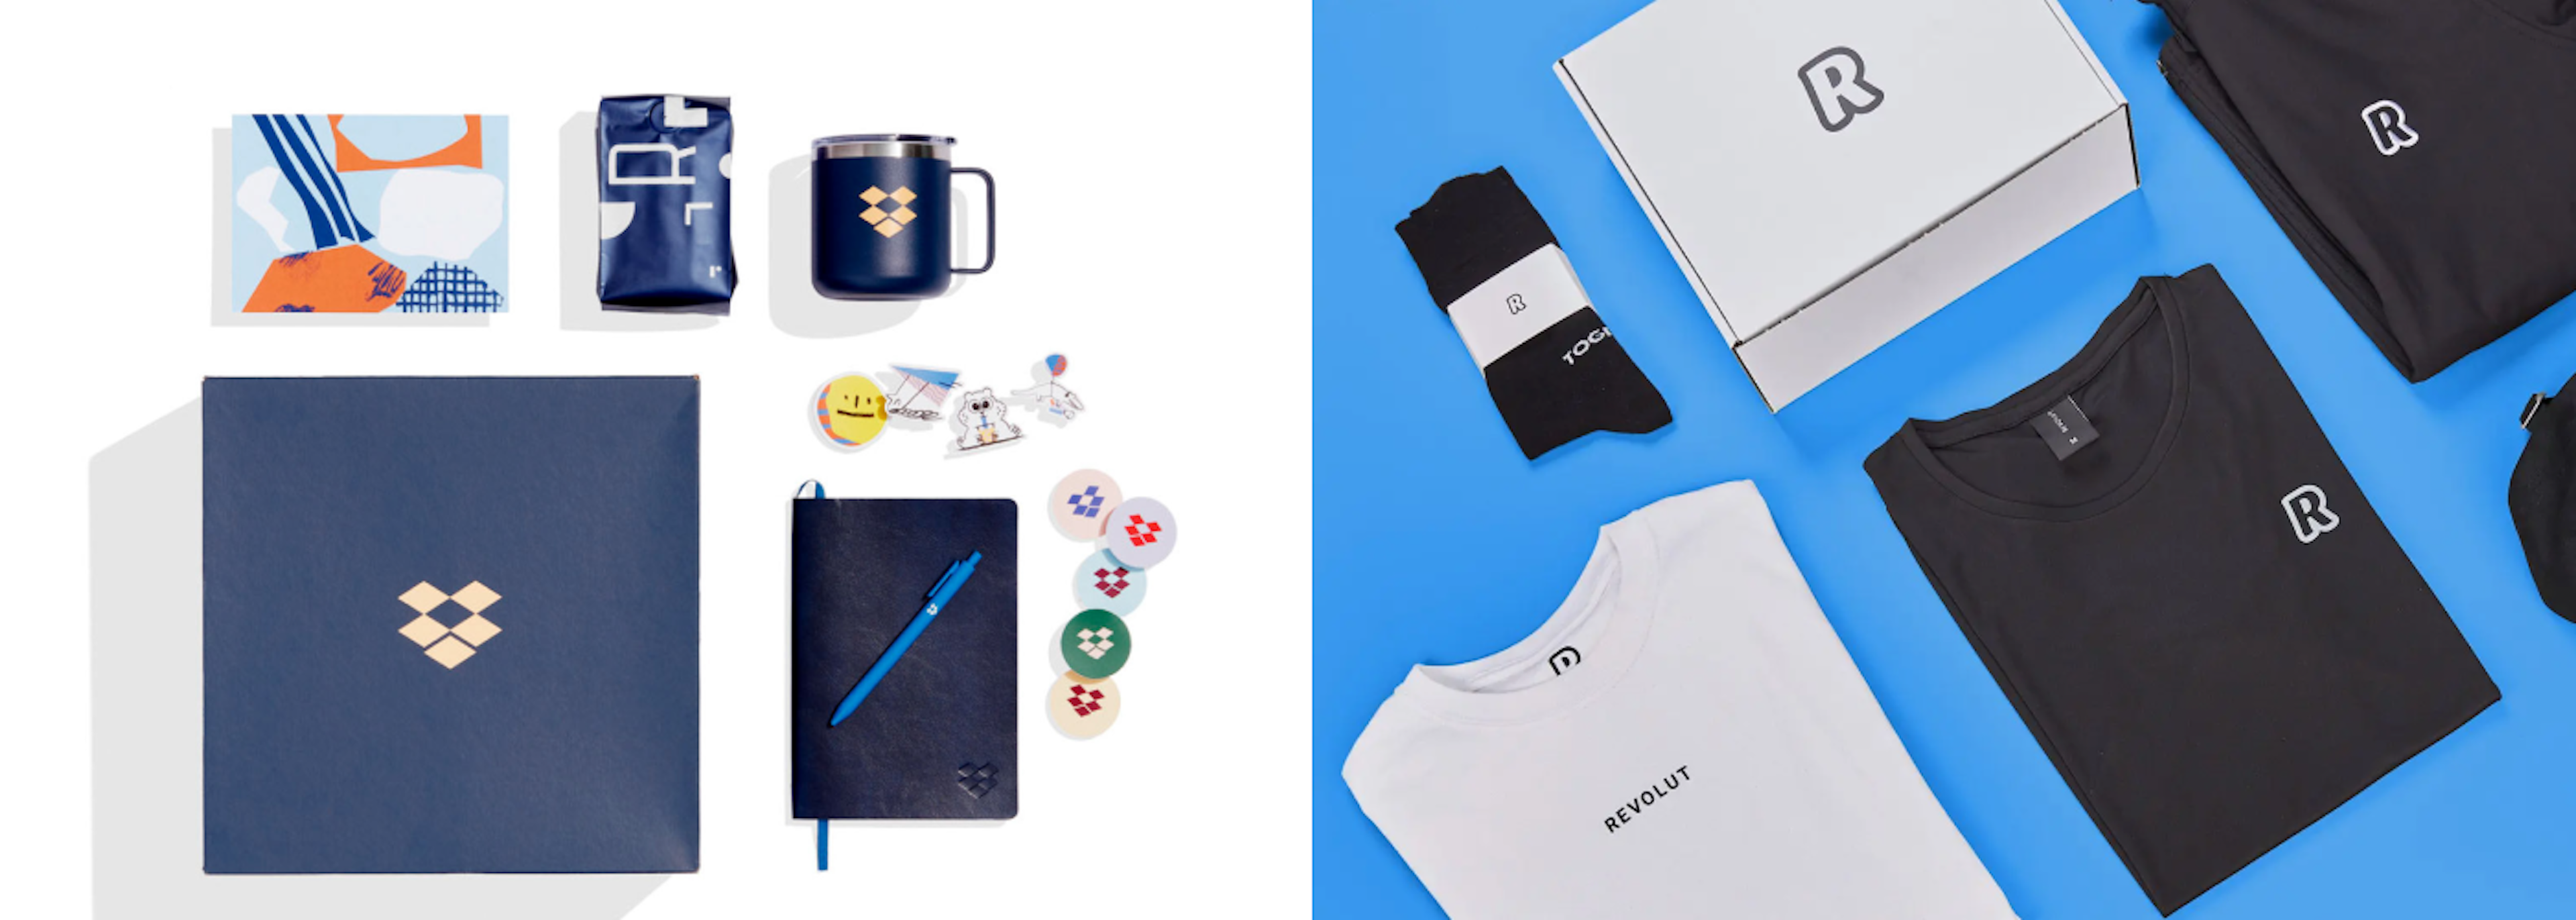 20 New Hire Welcome Kit Ideas